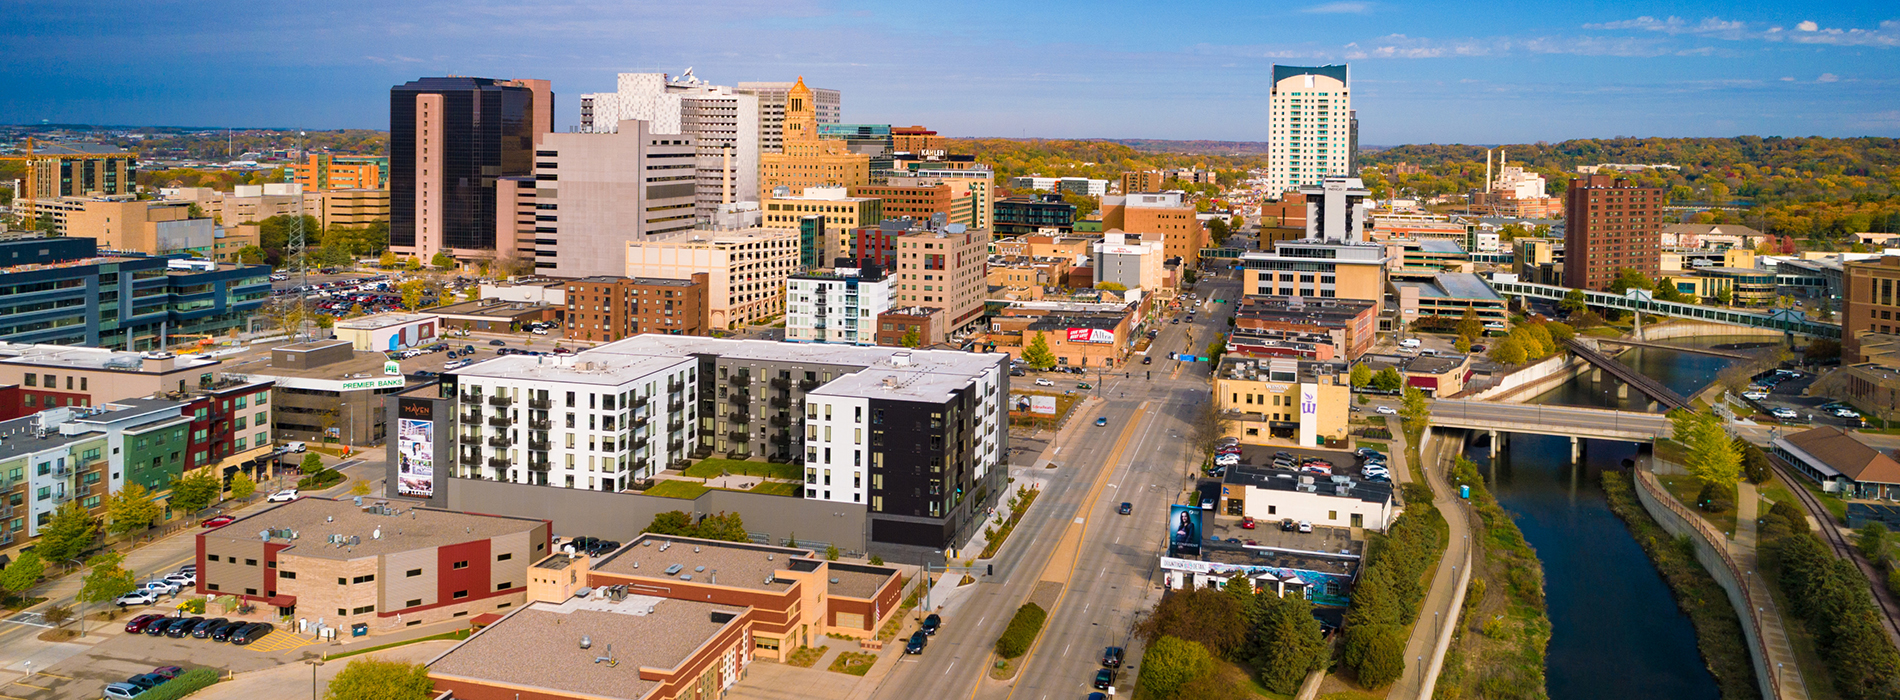 Aerial view of downtown Rochester, MN skyline